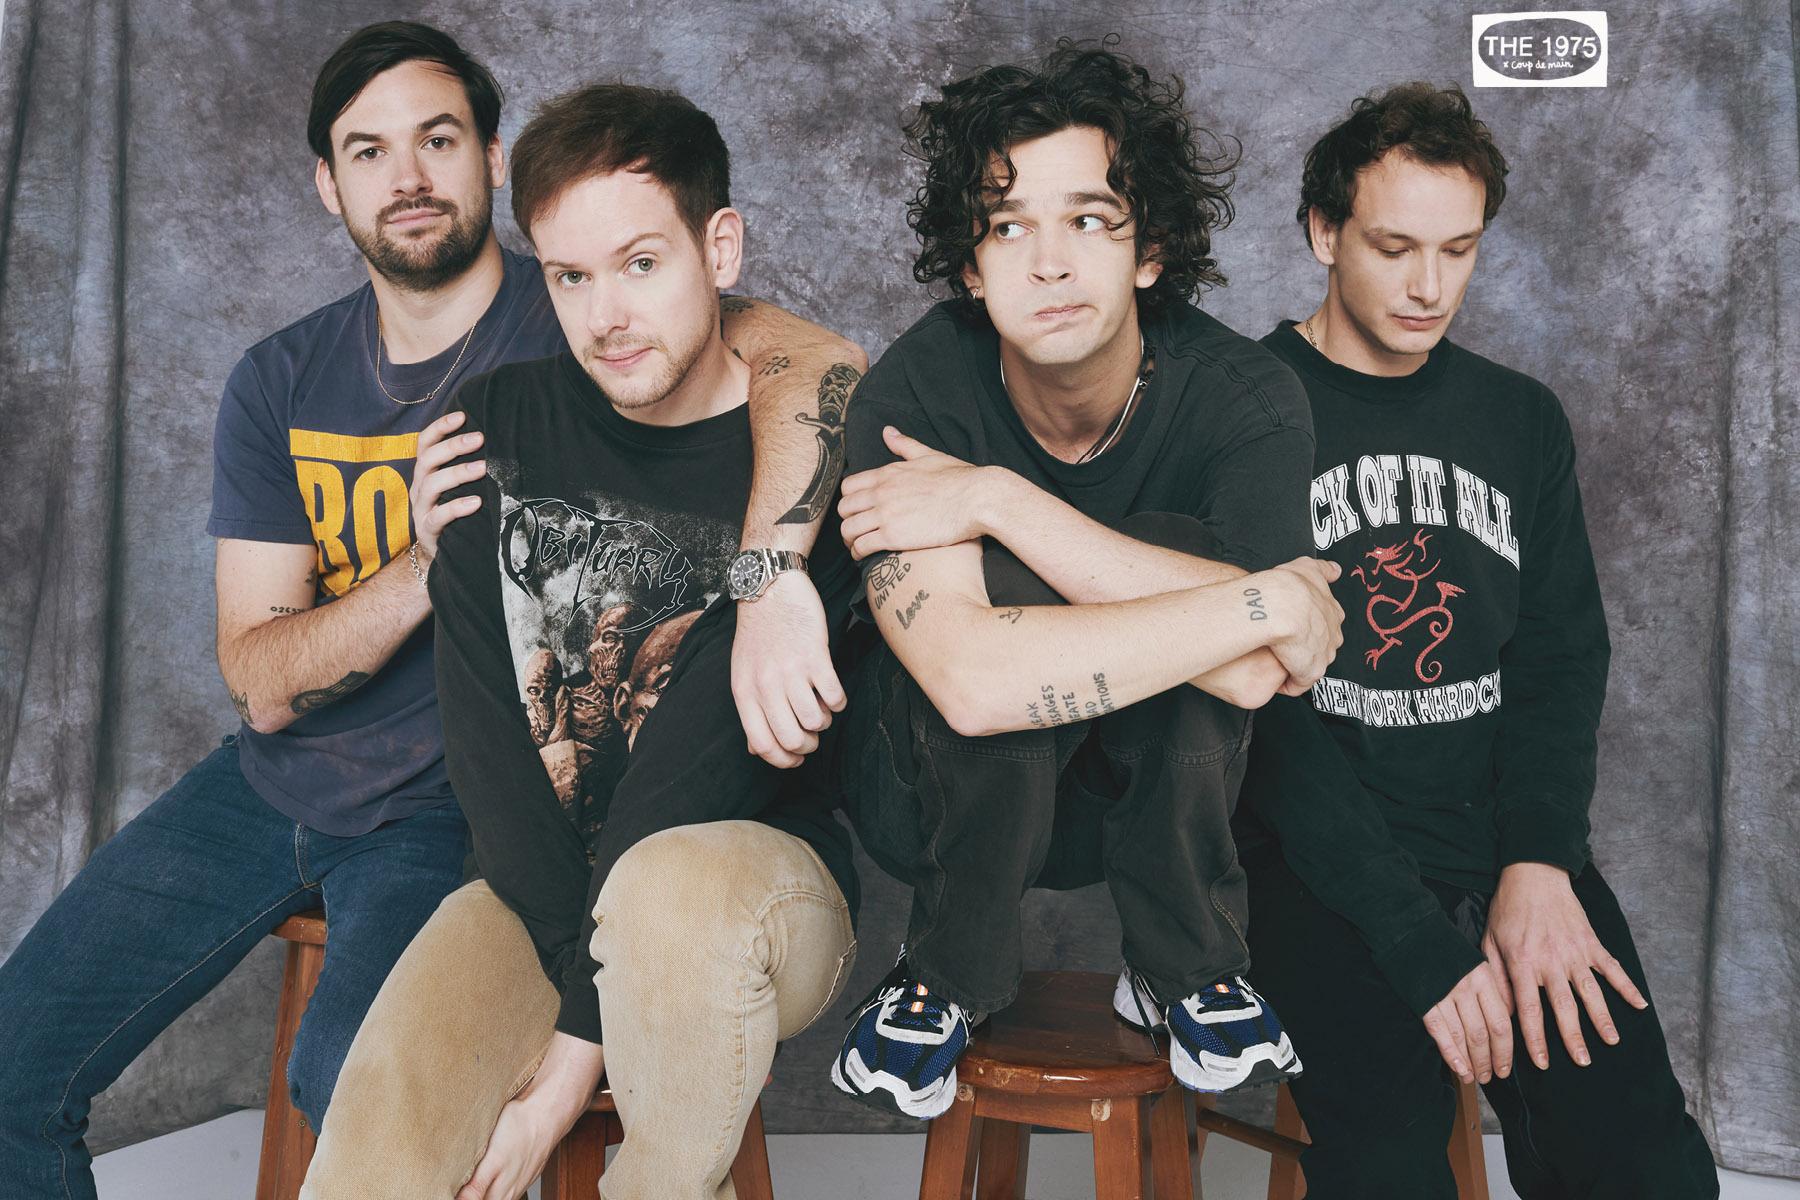 Interview The 1975 "Let's make things about purpose..." Coup De